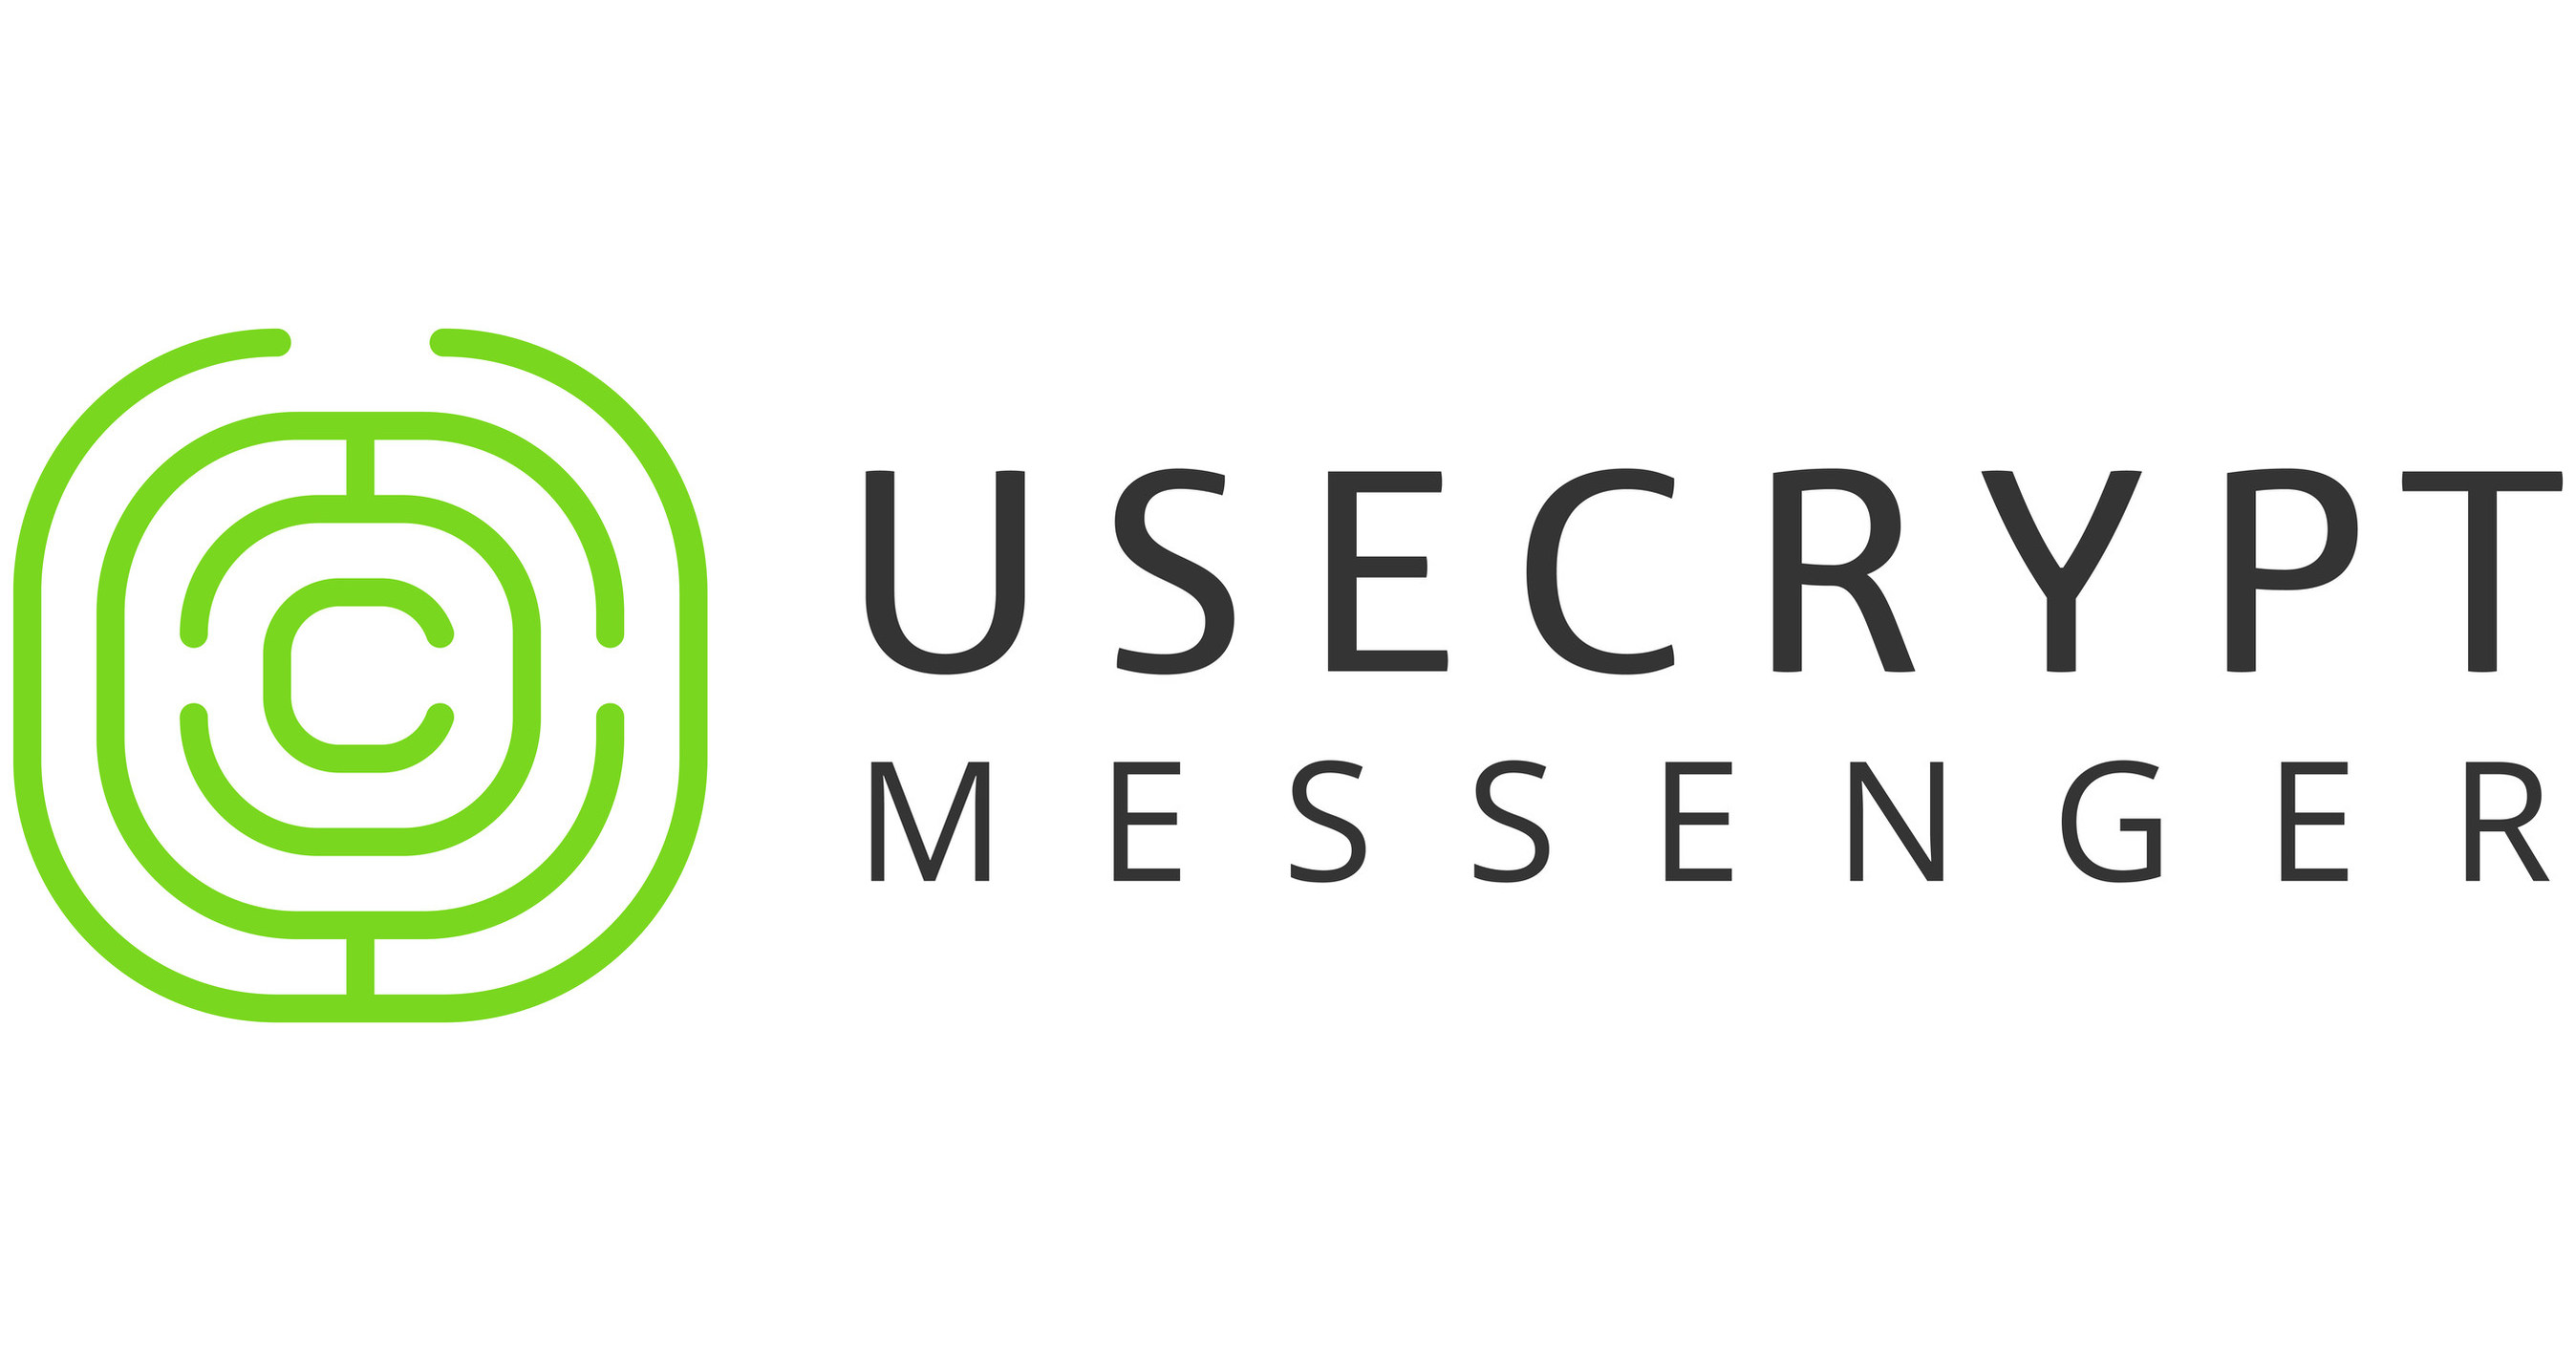 A Launch of Usecrypt Messenger - a Fundamentally New Mobile